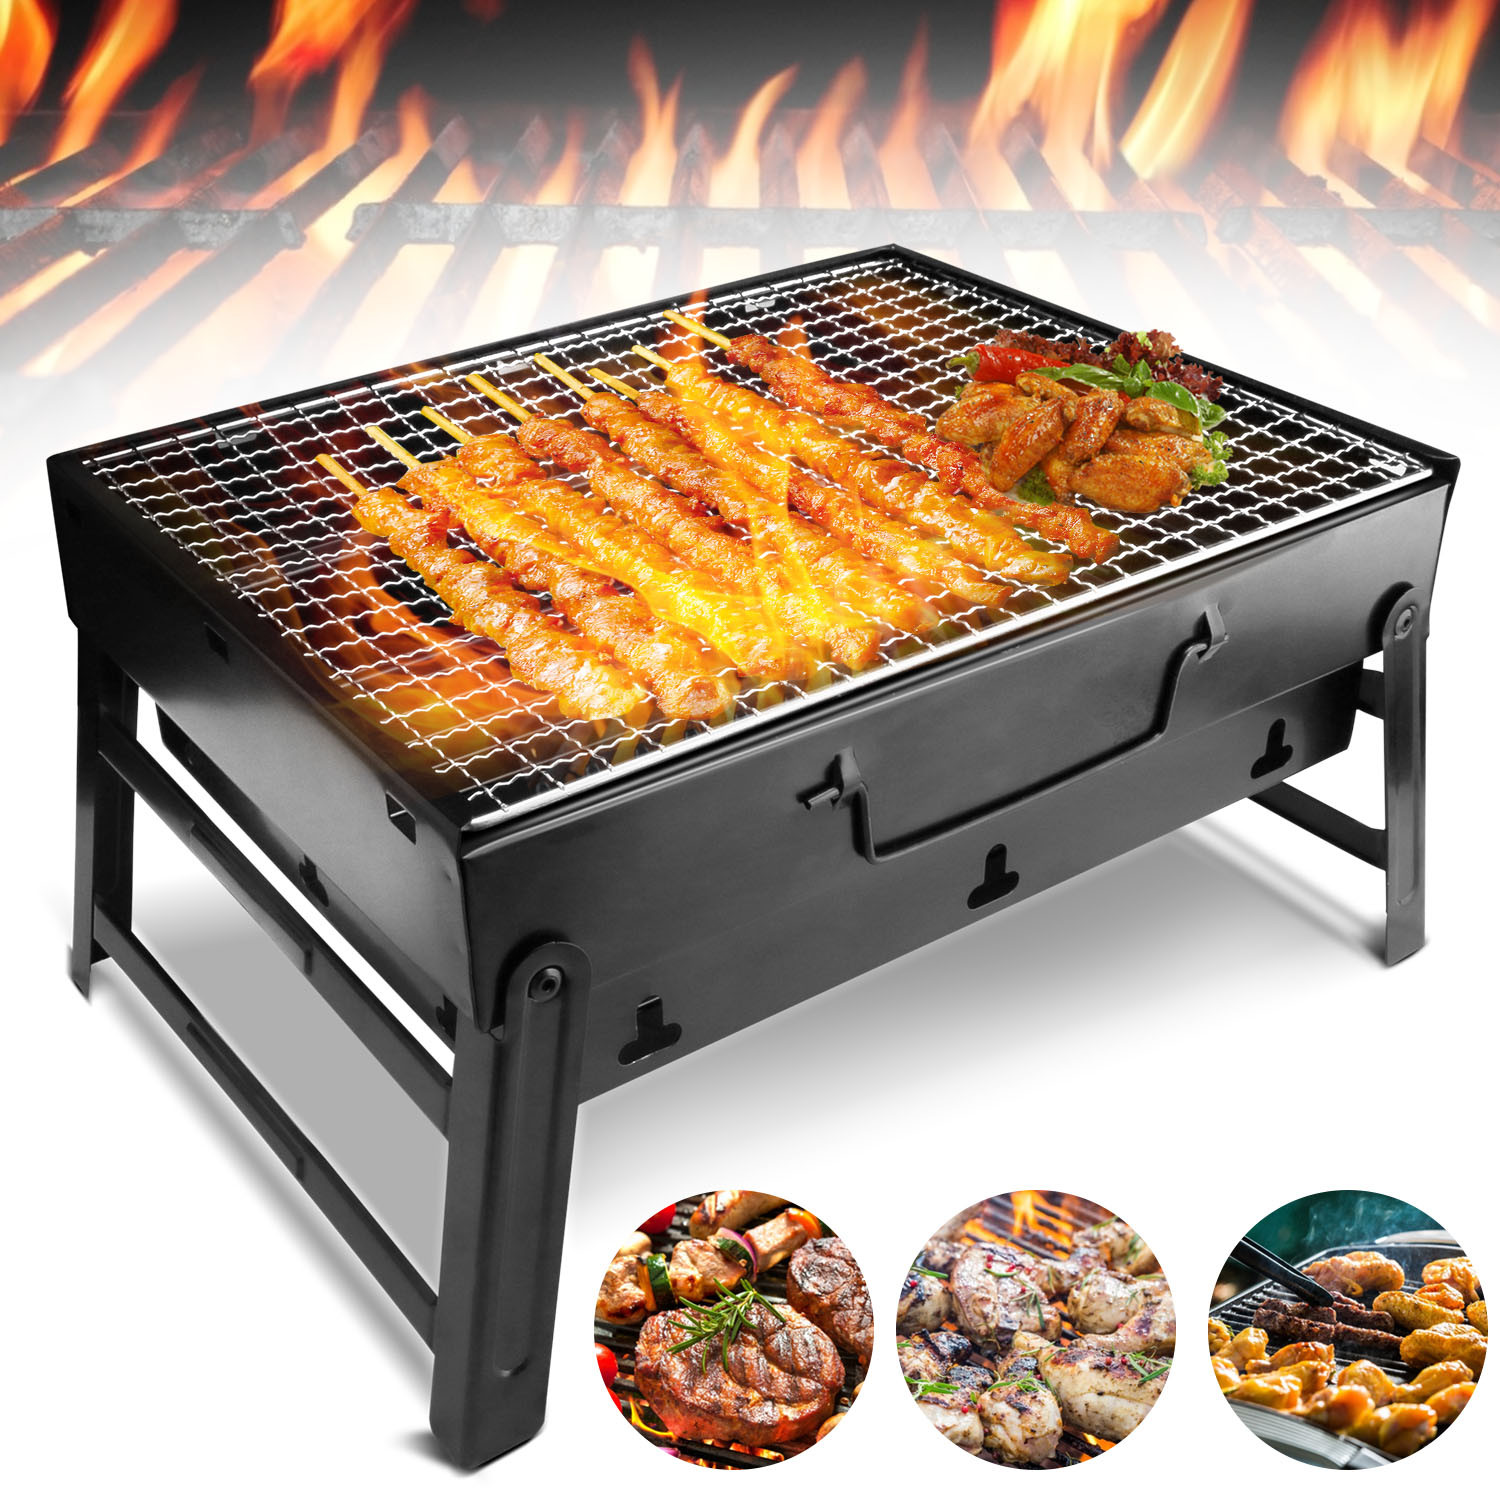 Htwon 13.7" Foldable BBQ Charcoal Grill, Portable Heavy Duty Barbecue Stainless Steel Tabletop Grill Stove with Handle Outdoor Camping Picnic Barbecue BBQ Accessories Tools - image 1 of 14